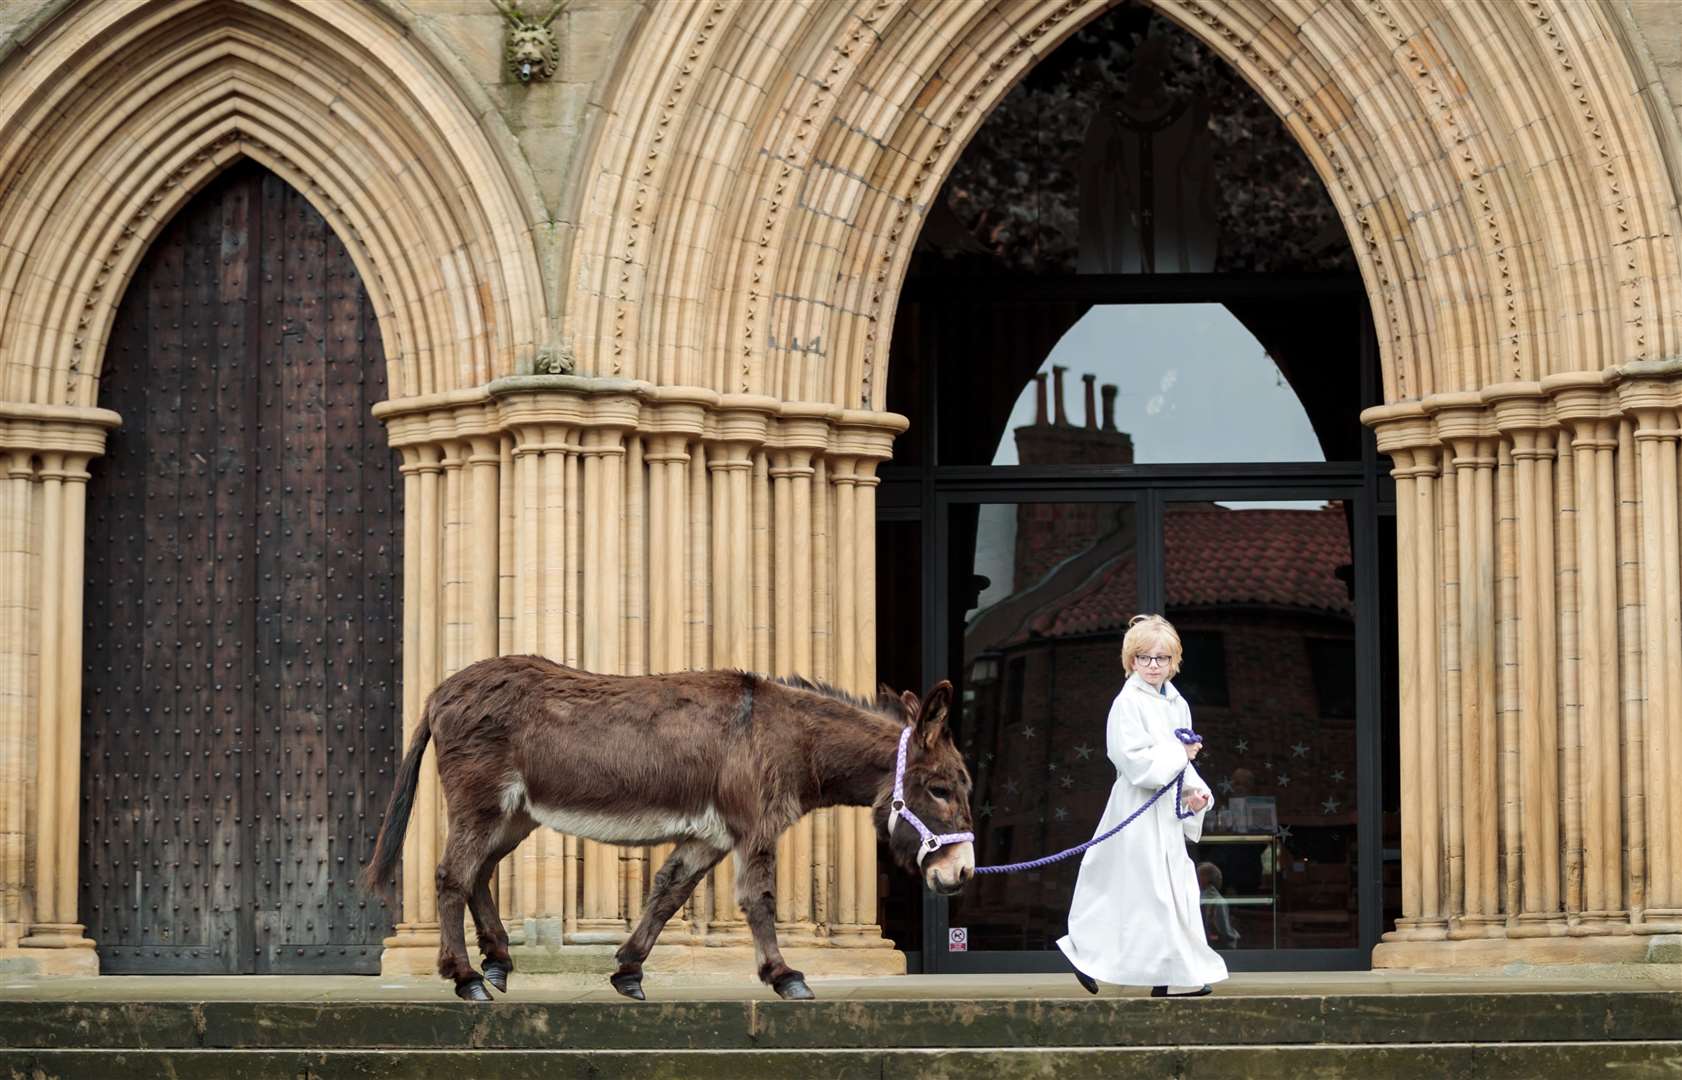 Palm Sunday procession through Ripon City with Lily the donkey